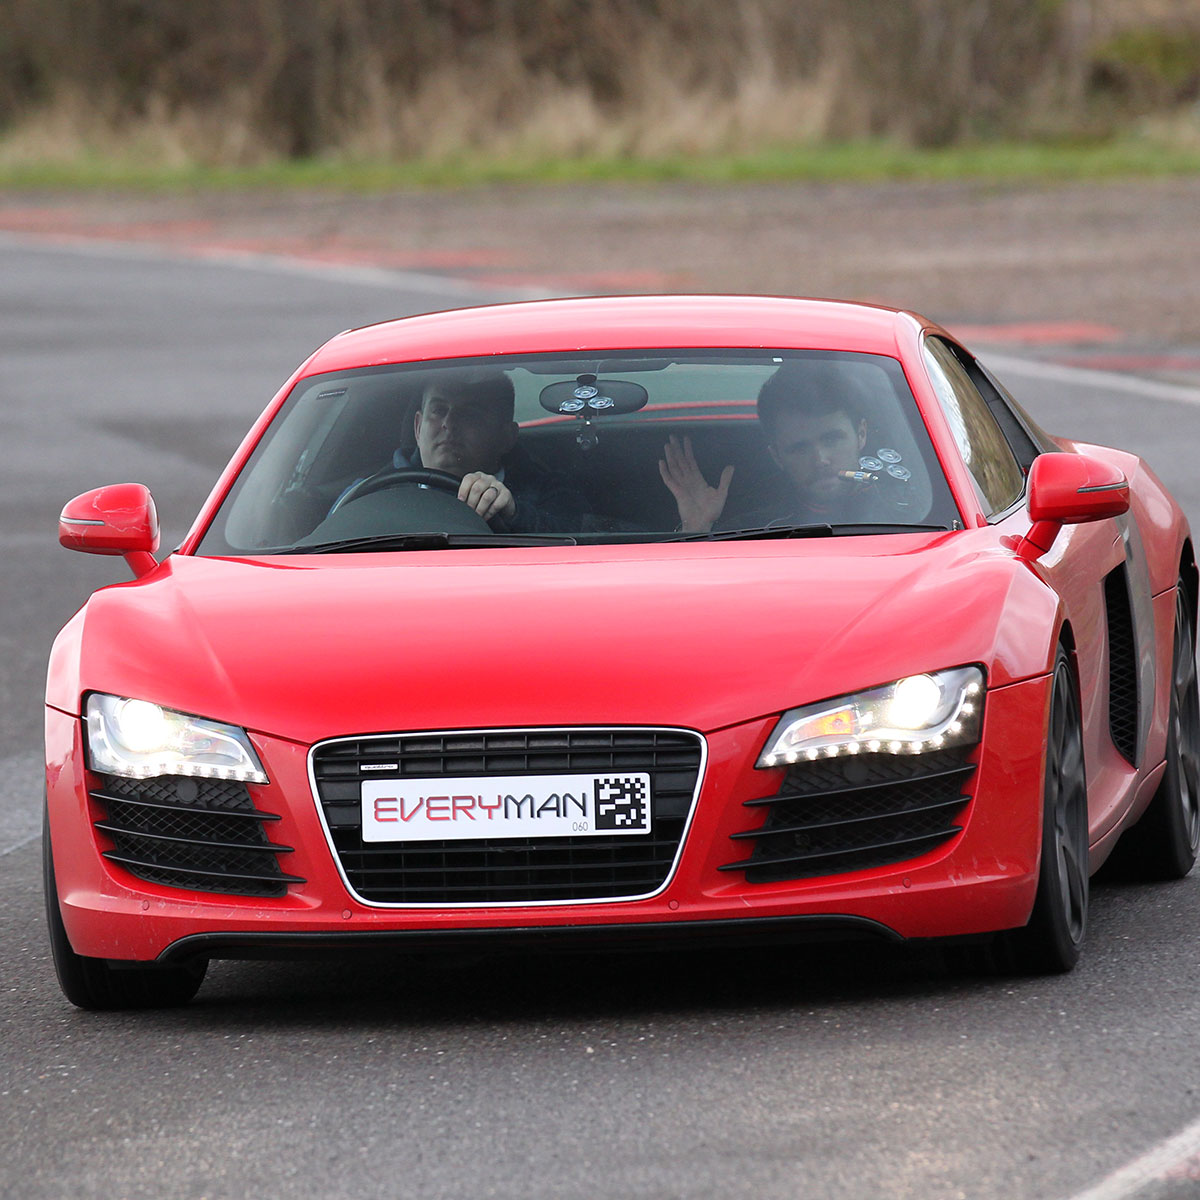 Triple Supercar Driving Experience